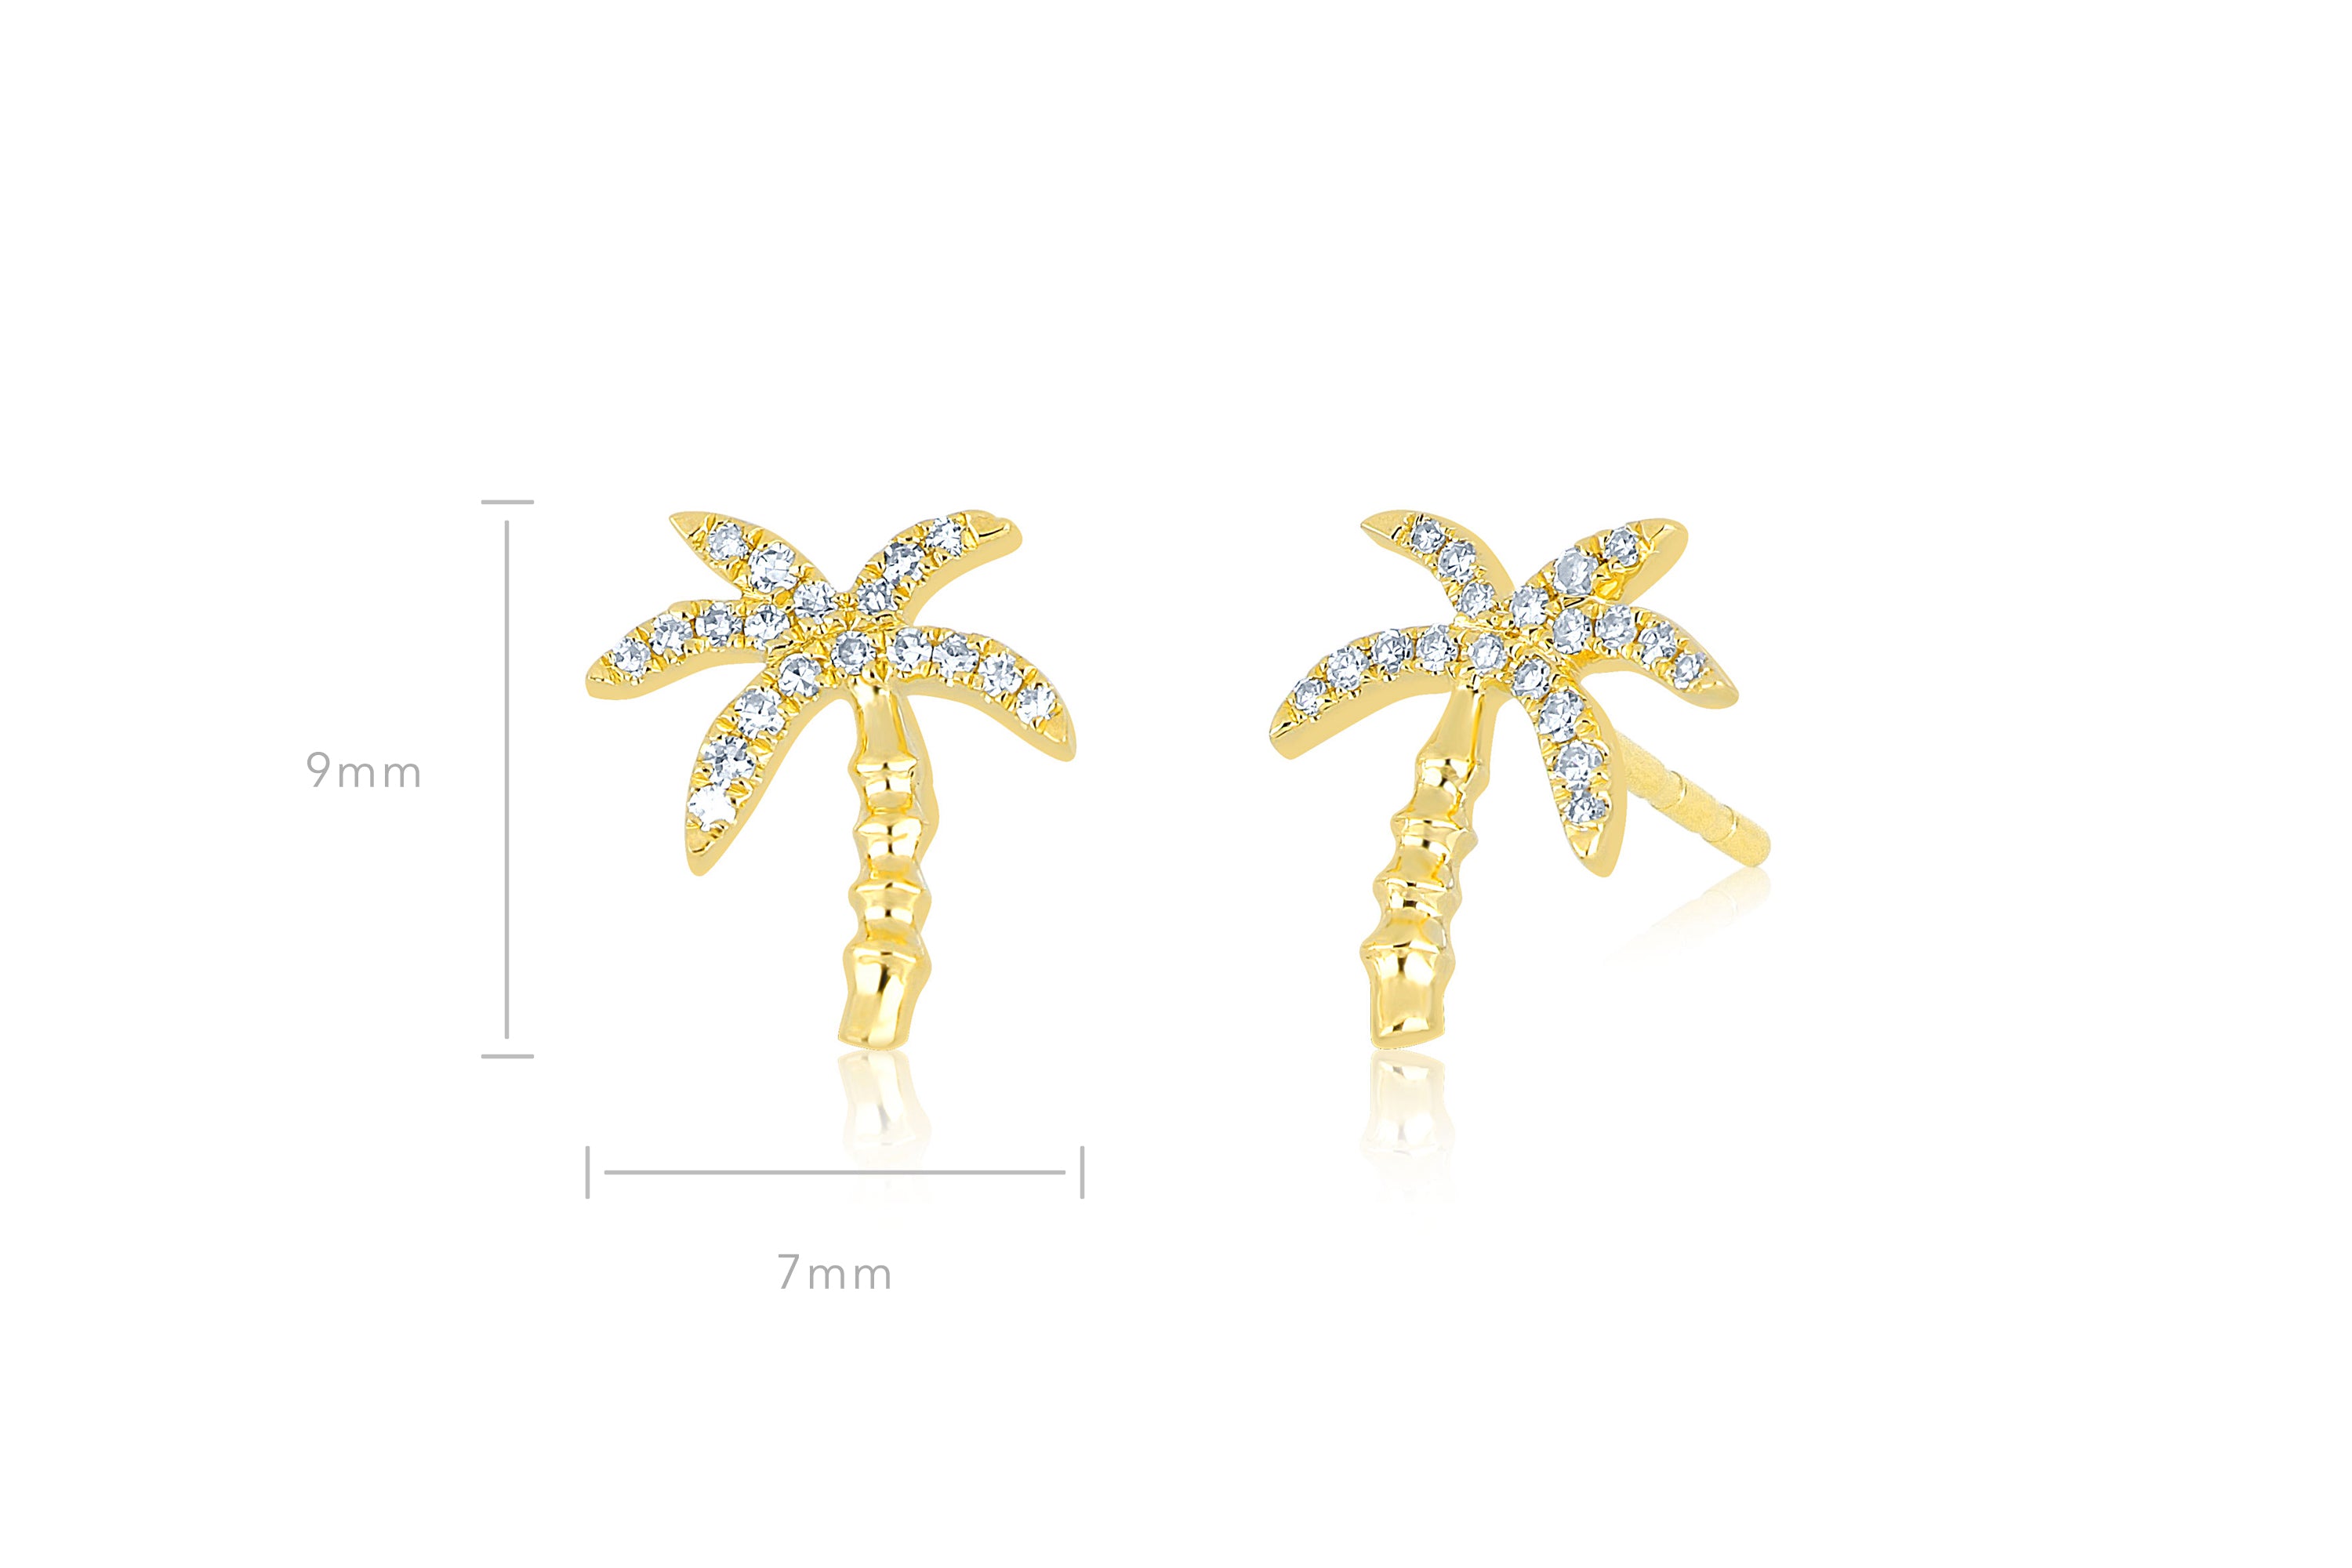 Diamond Wild Palm Stud Earring in 14k yellow gold with height measurement of 9mm and width of 7mm